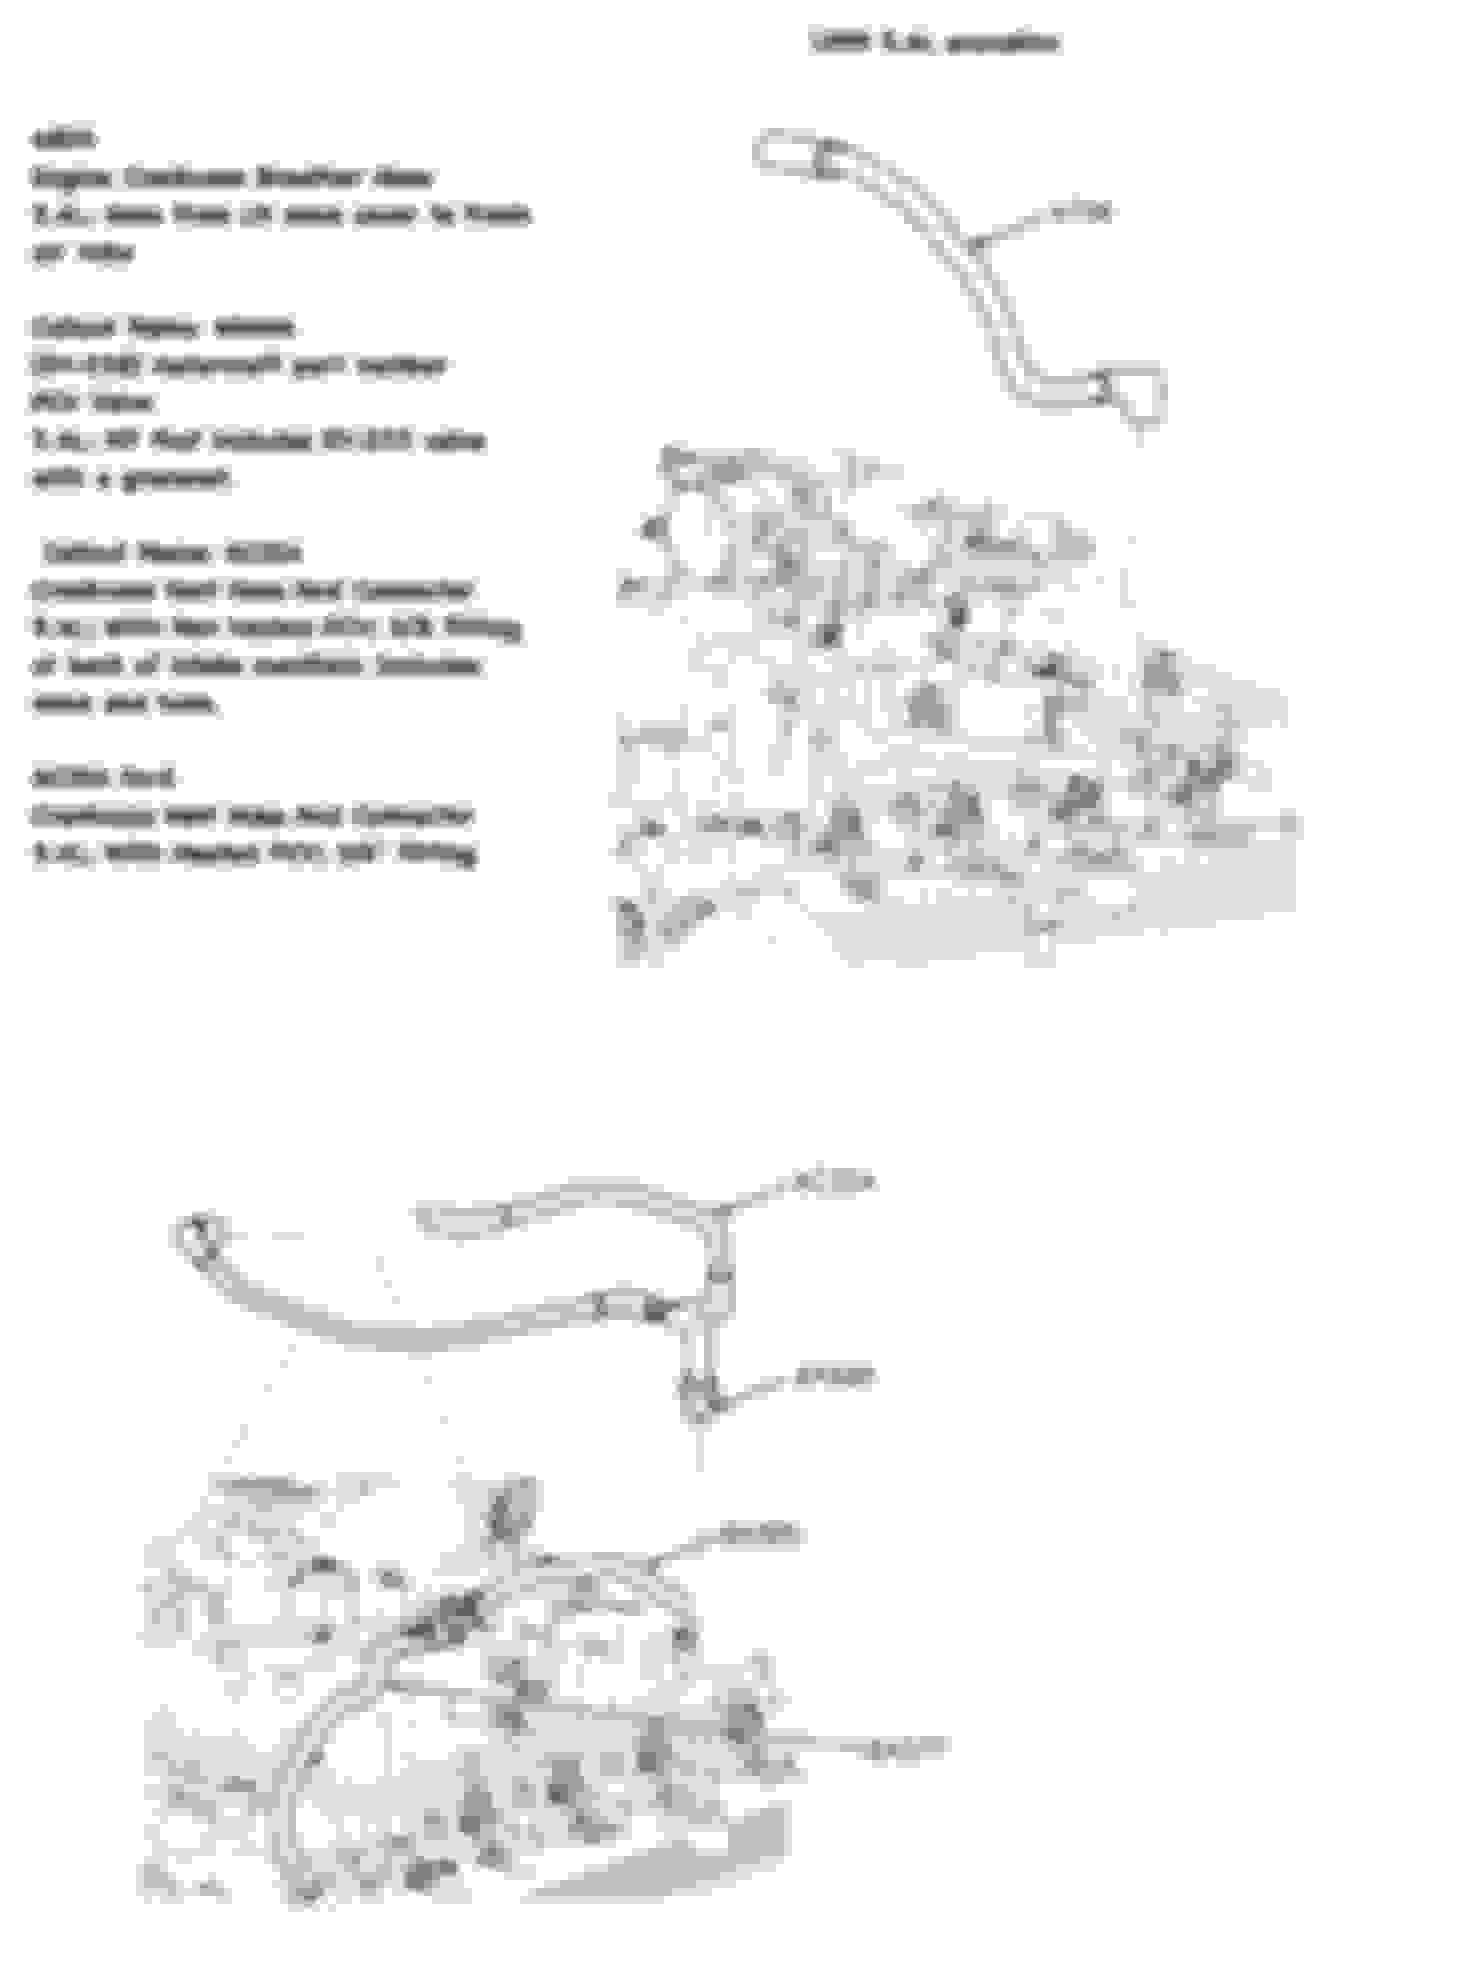 2000 Ford Expedition Cooling System Diagram - General Wiring Diagram